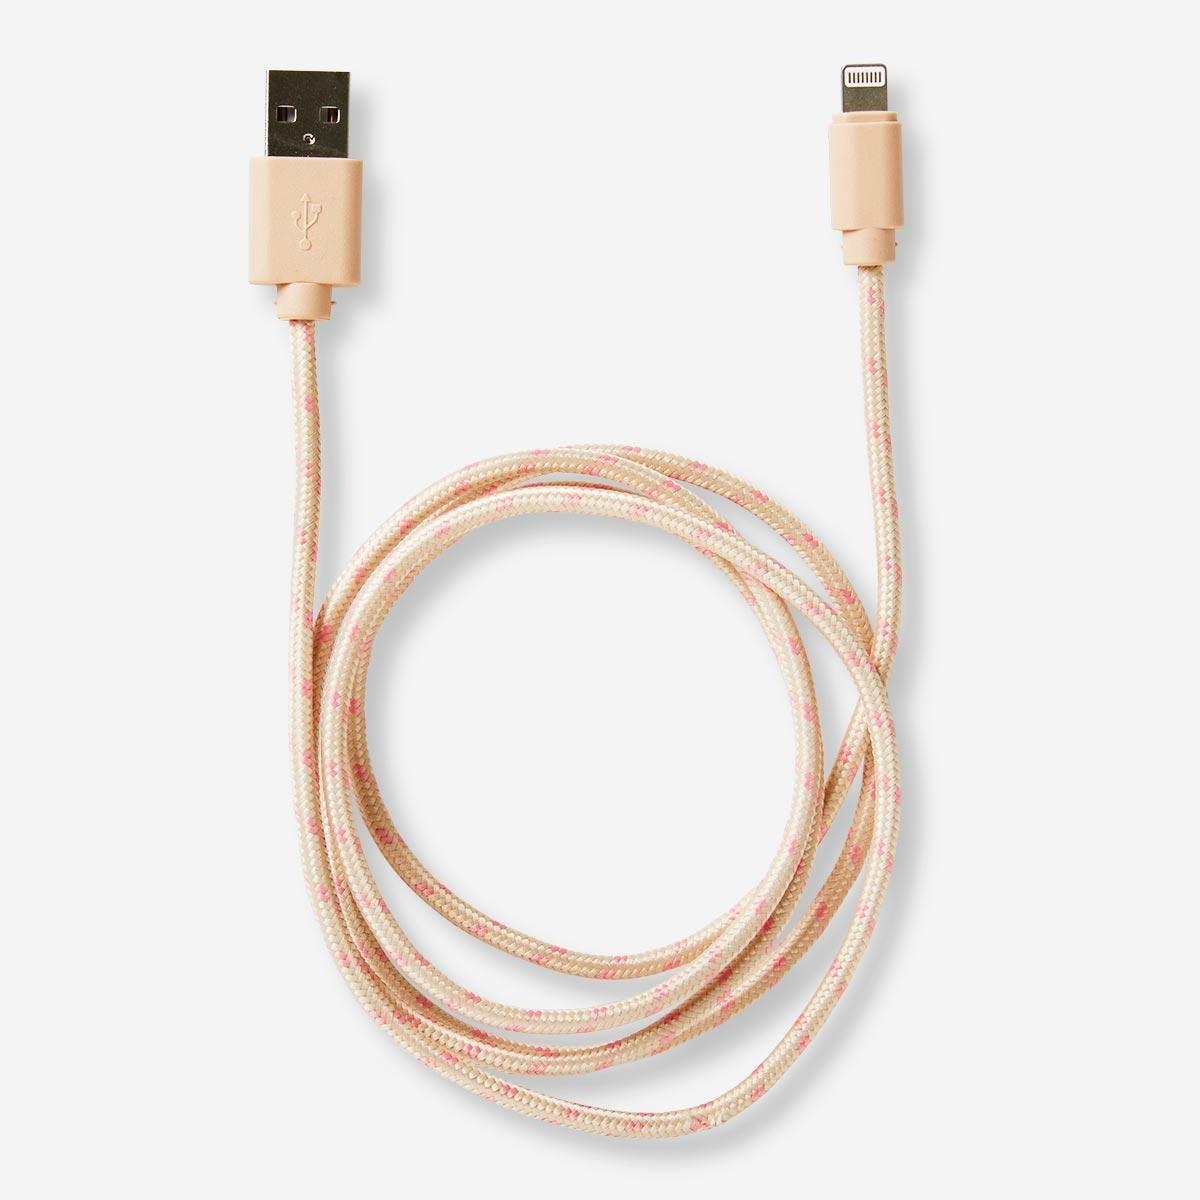 Beige iphones charging cable.